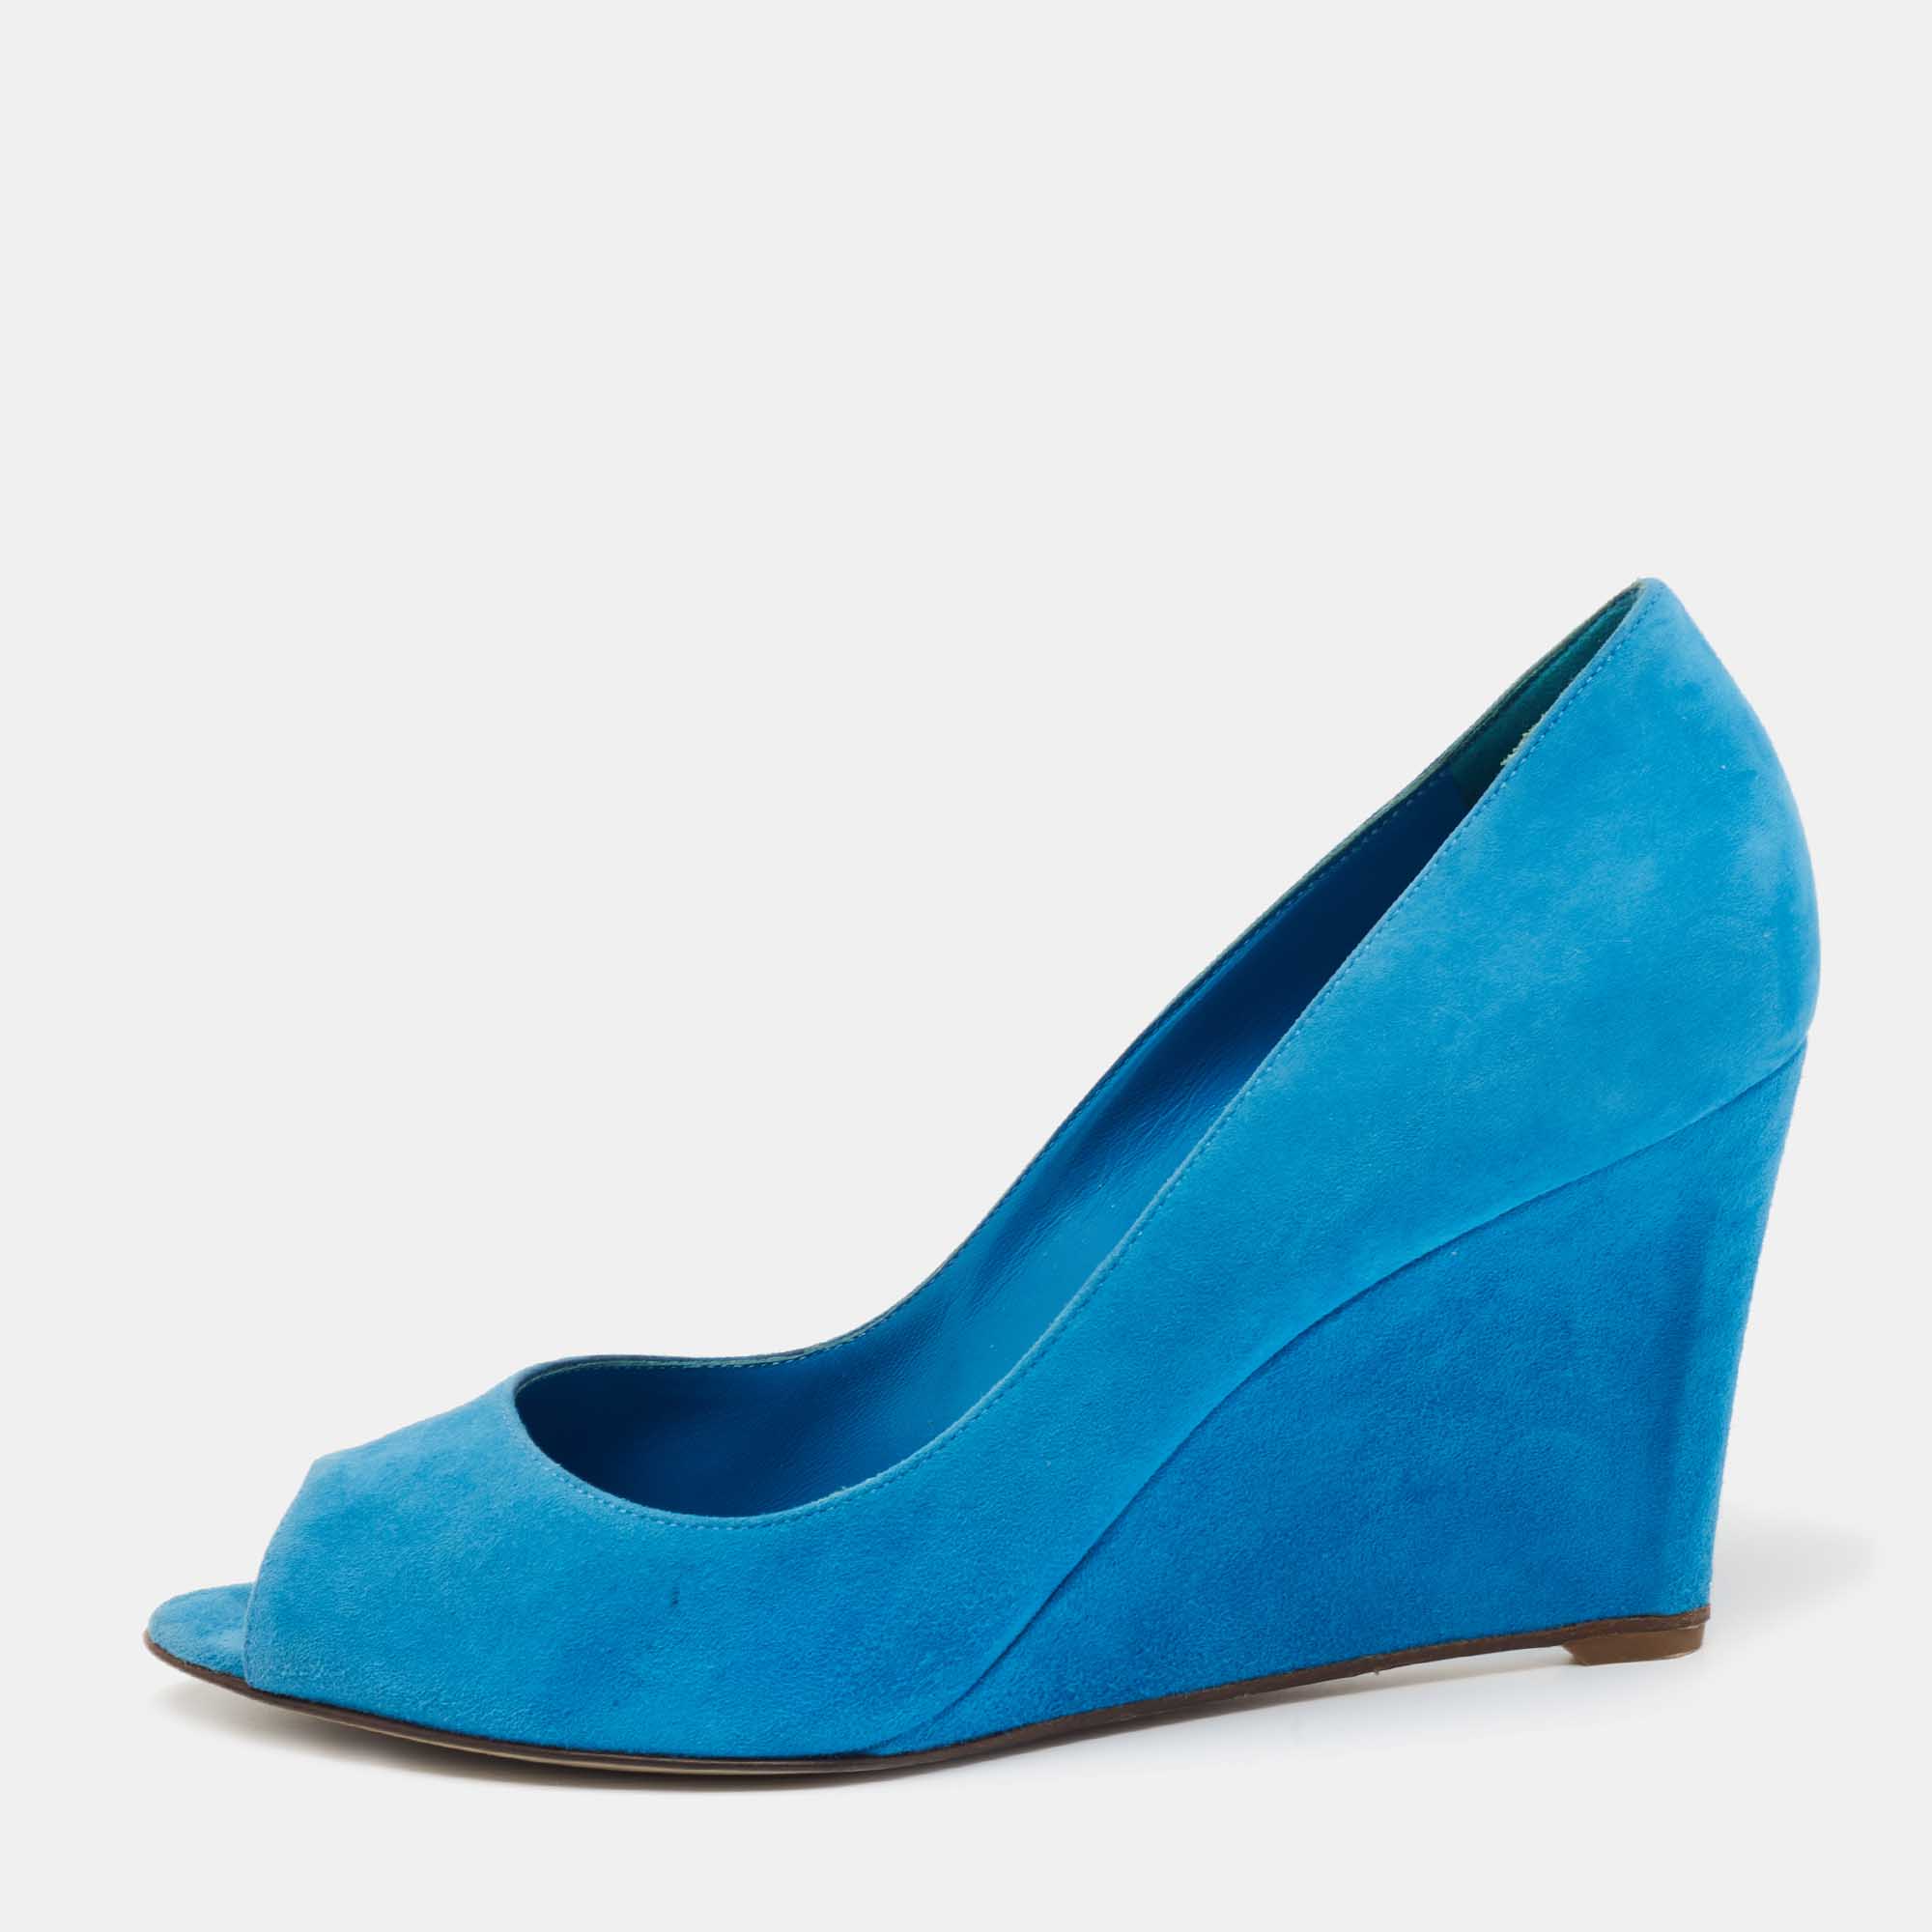 Pre-owned Sergio Rossi Blue Suede Peep Toe Wedge Pumps Size 40.5